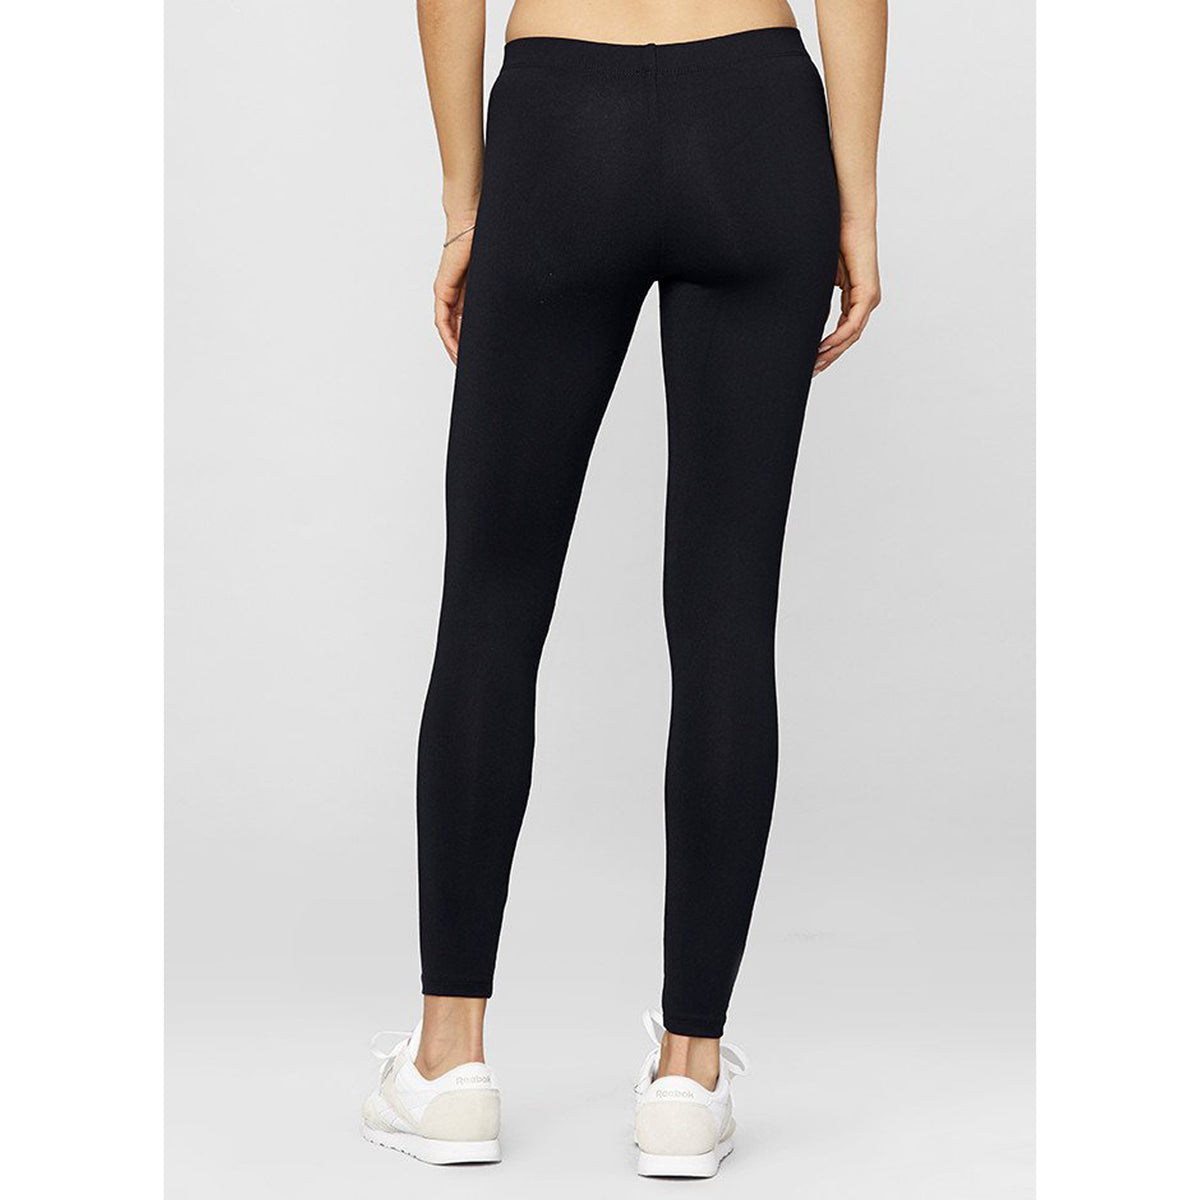 DAVID-K LEGGINGS WOMEN'S YOGA PANTS WITH SOLID WAISTBAND ONE SIZE